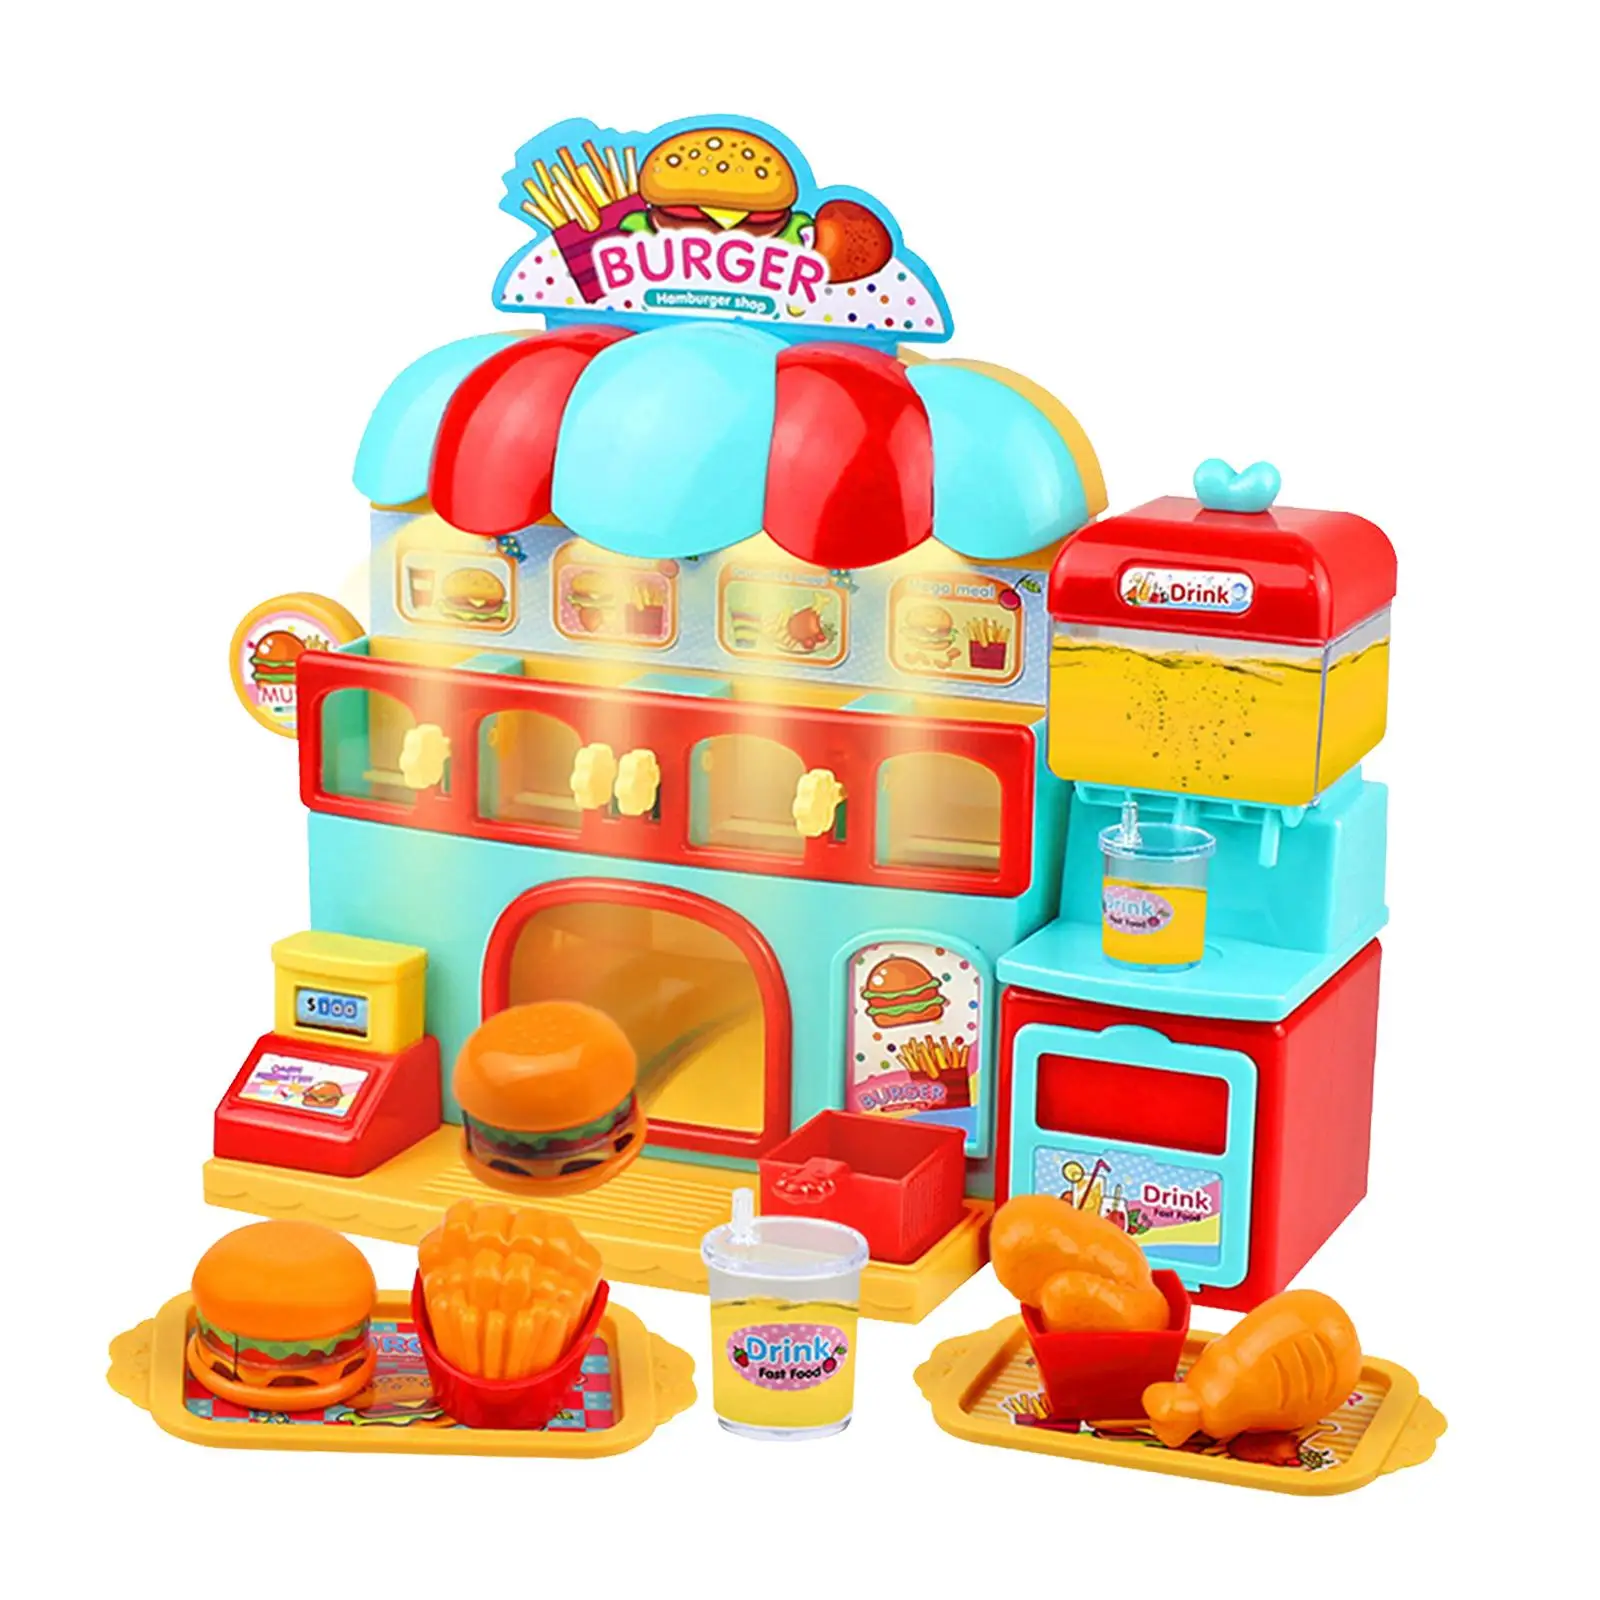 Fastfood Shop Toy Hamburger Pretend Play Toy Fastfood Kitchen Playset Kitchen Toys Burgers Shop Toy for Boys Girls Kids Gift